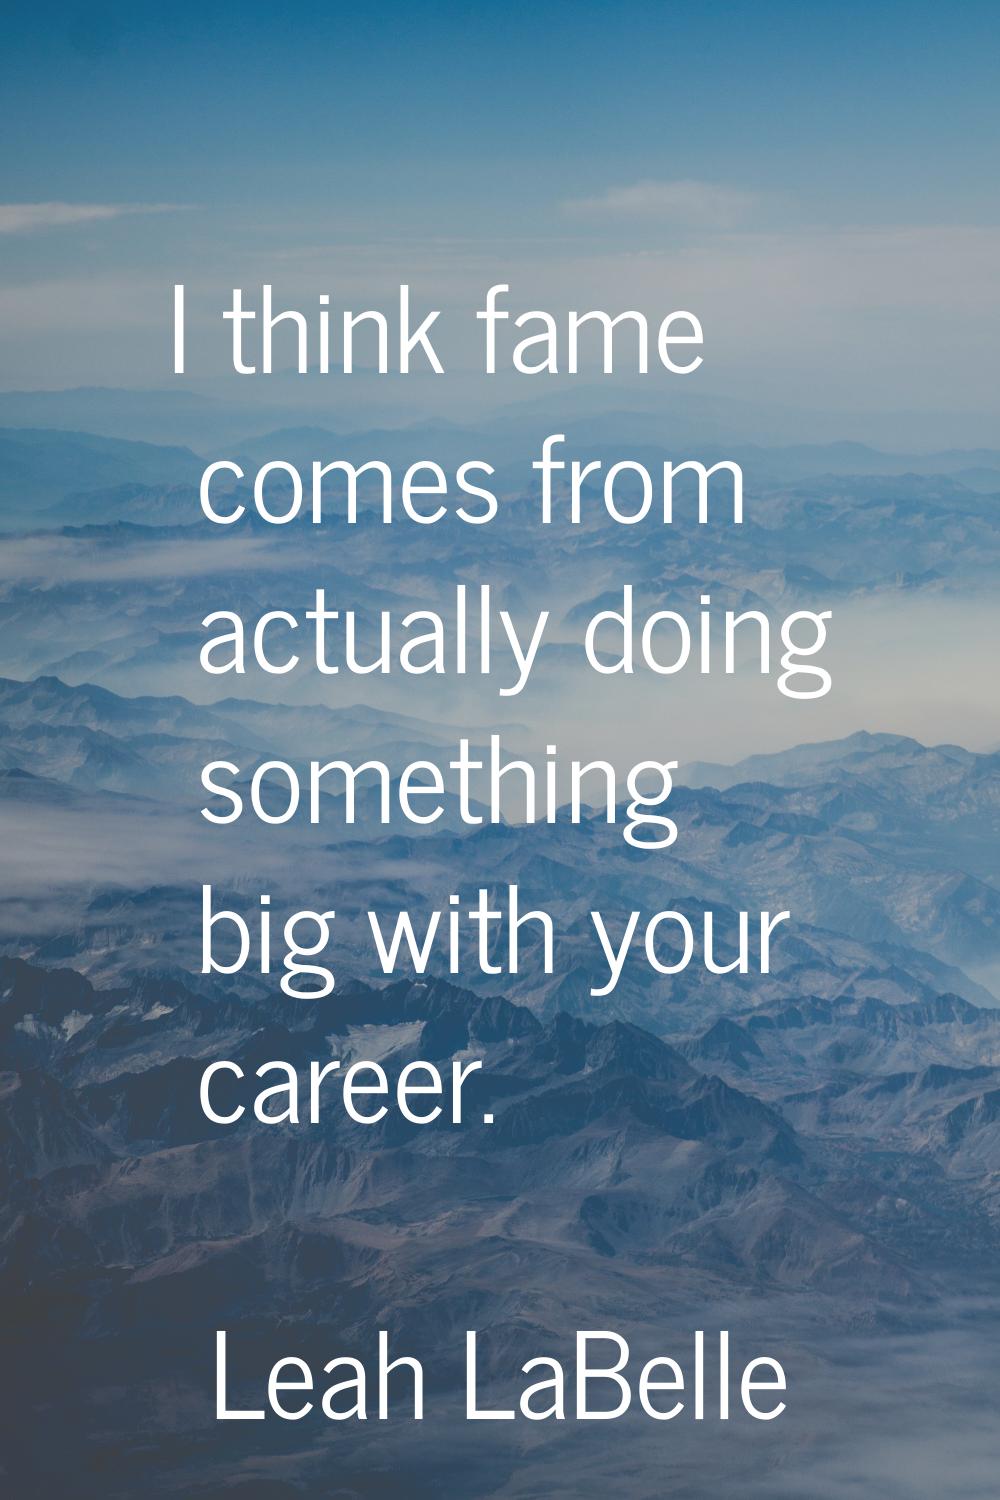 I think fame comes from actually doing something big with your career.